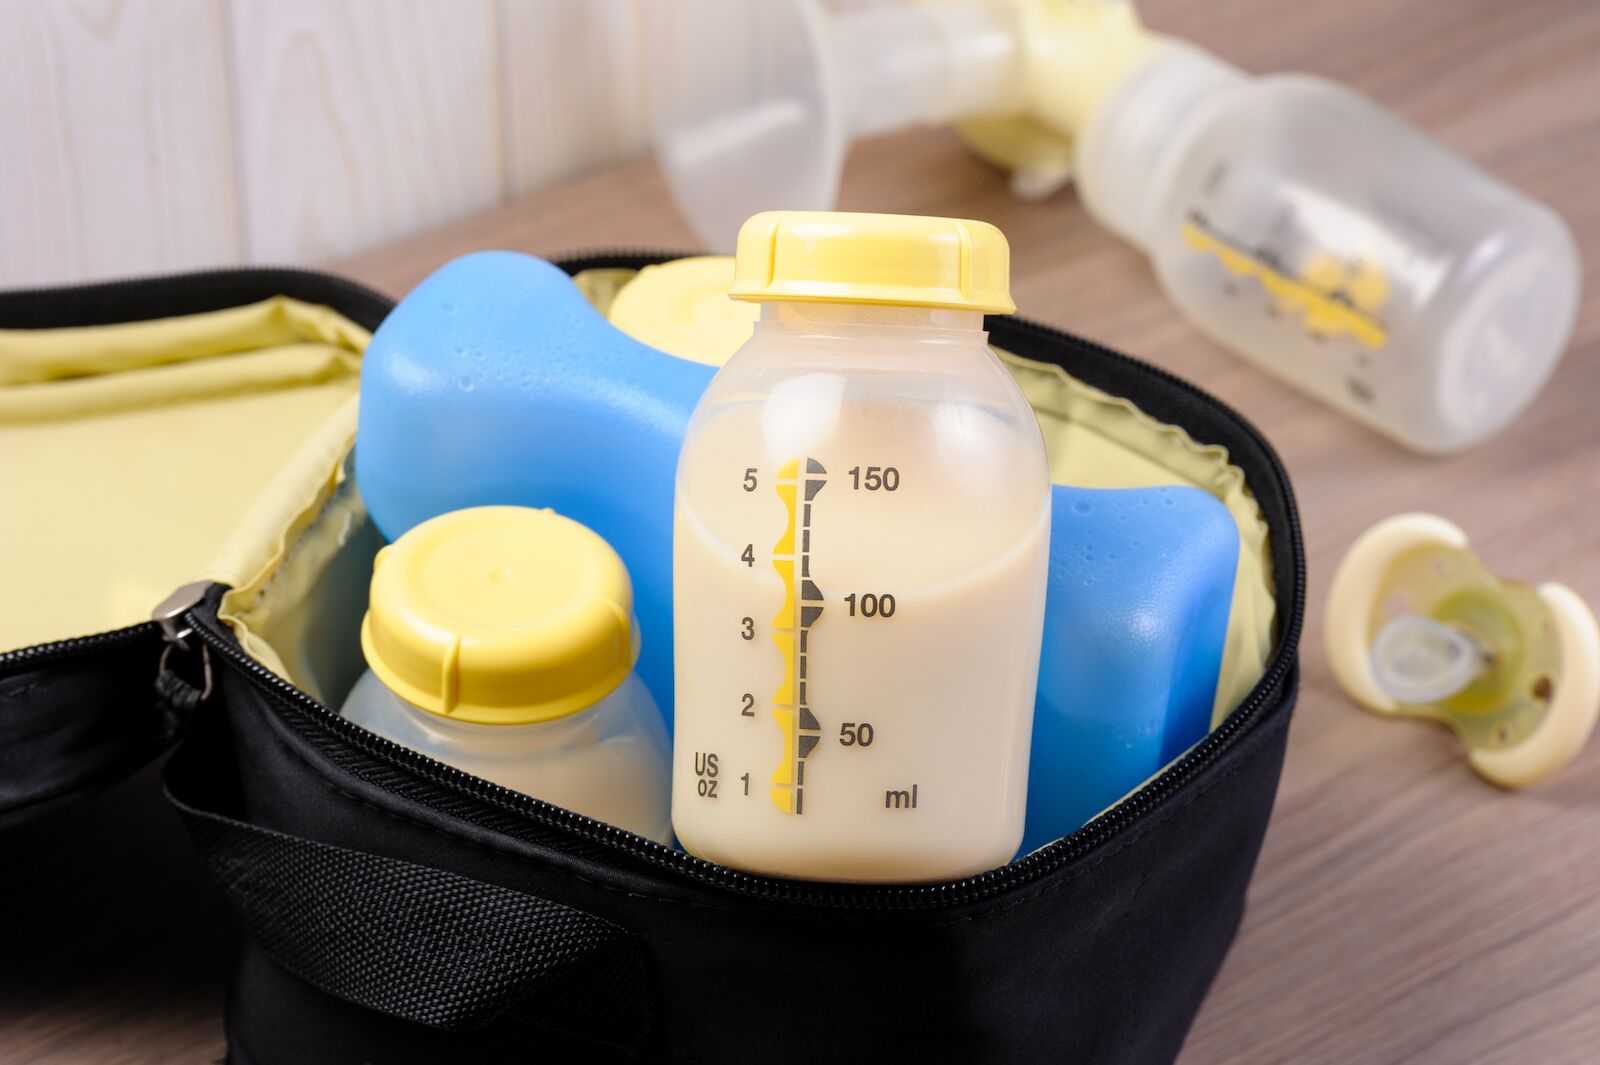 Equipment and supplies needed to travel with breast milk: breast pumps and milk storage